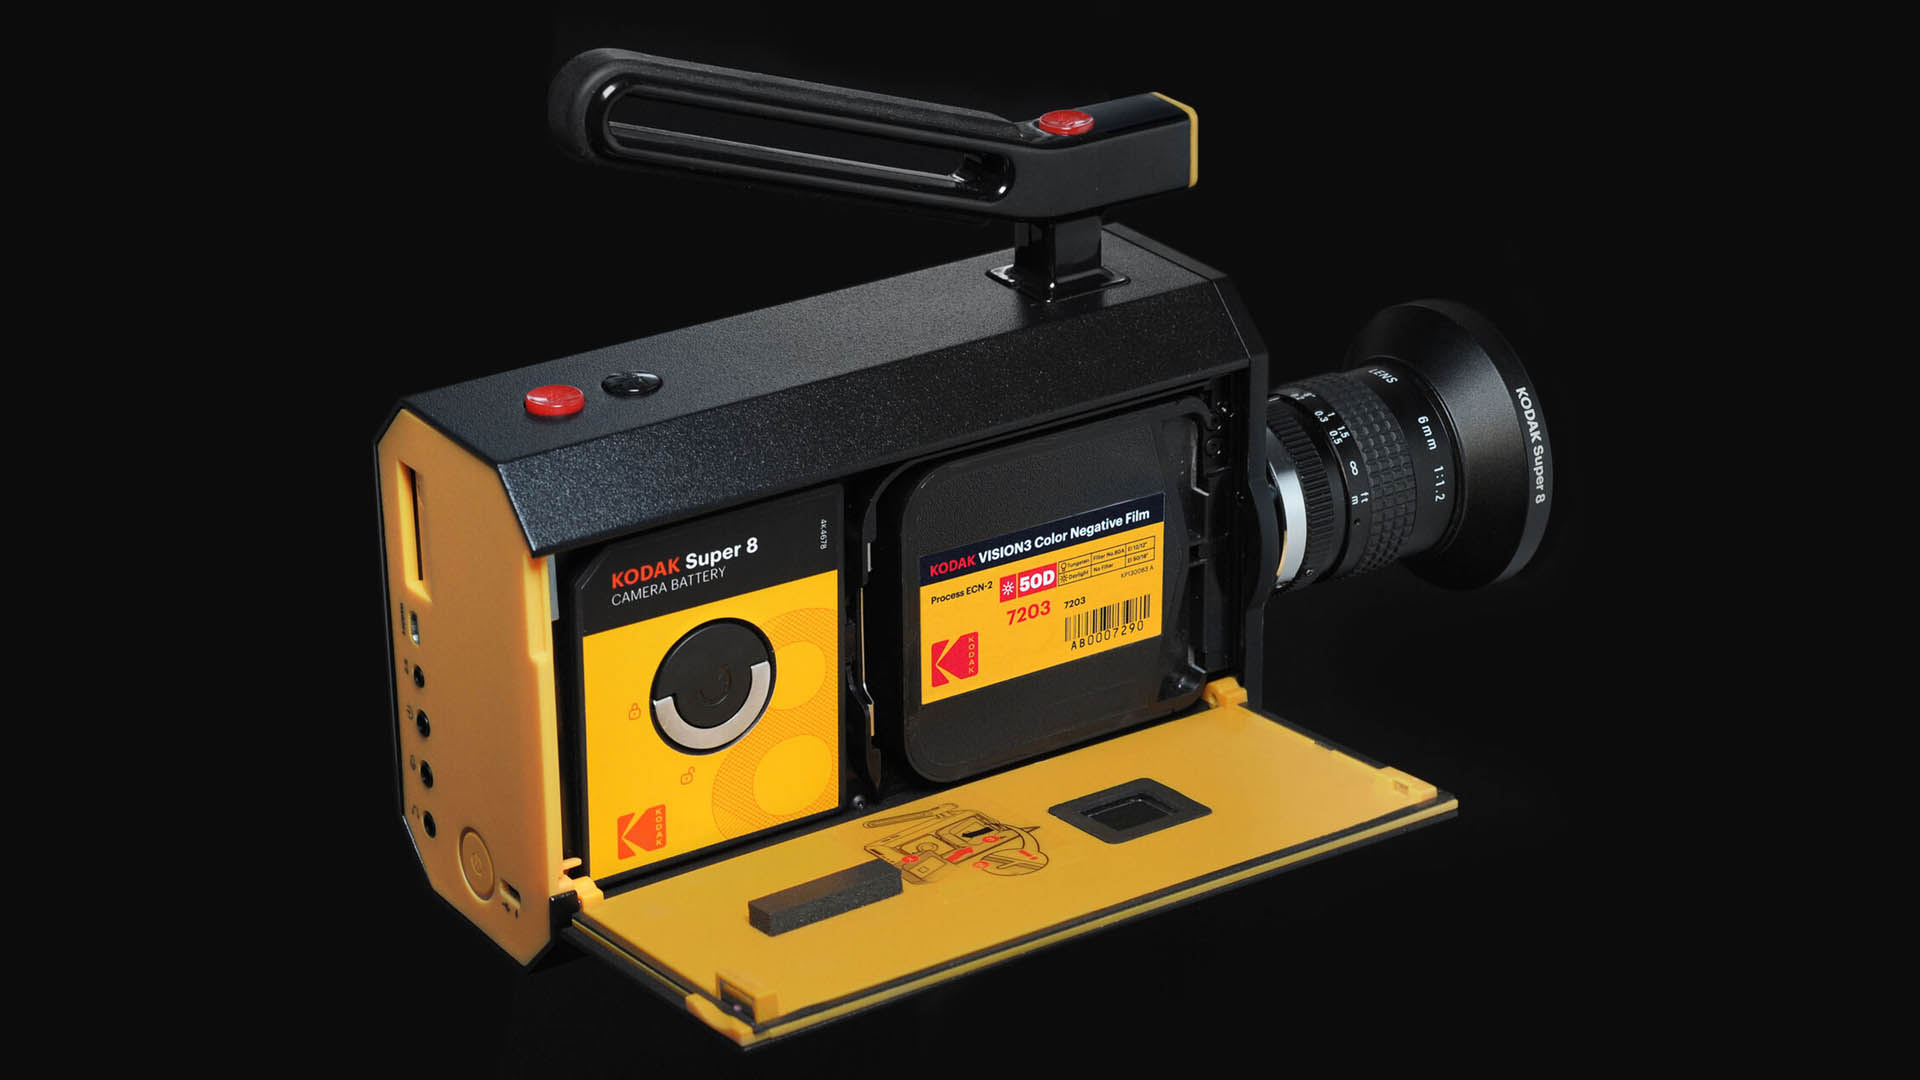 Kodak Super 8 Camera Revived - At More than 10 Times Its Original Price,  Will It Finally Arrive?